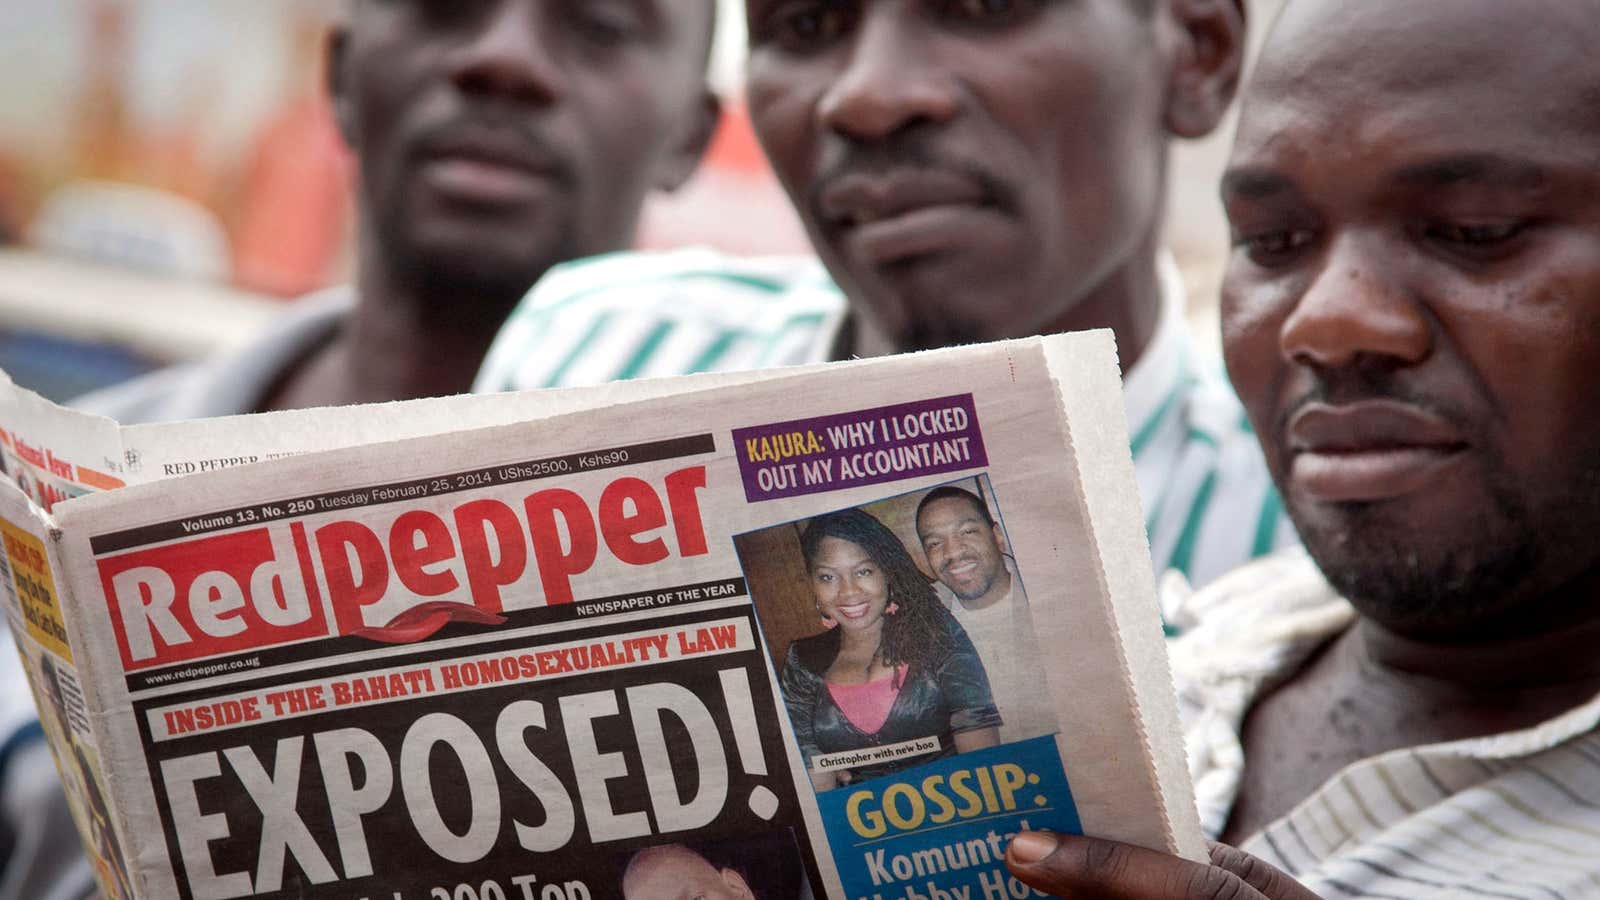 A Ugandan newspaper outed “200 top” homosexuals in February,  the day after a harsh anti-gay law was enacted.